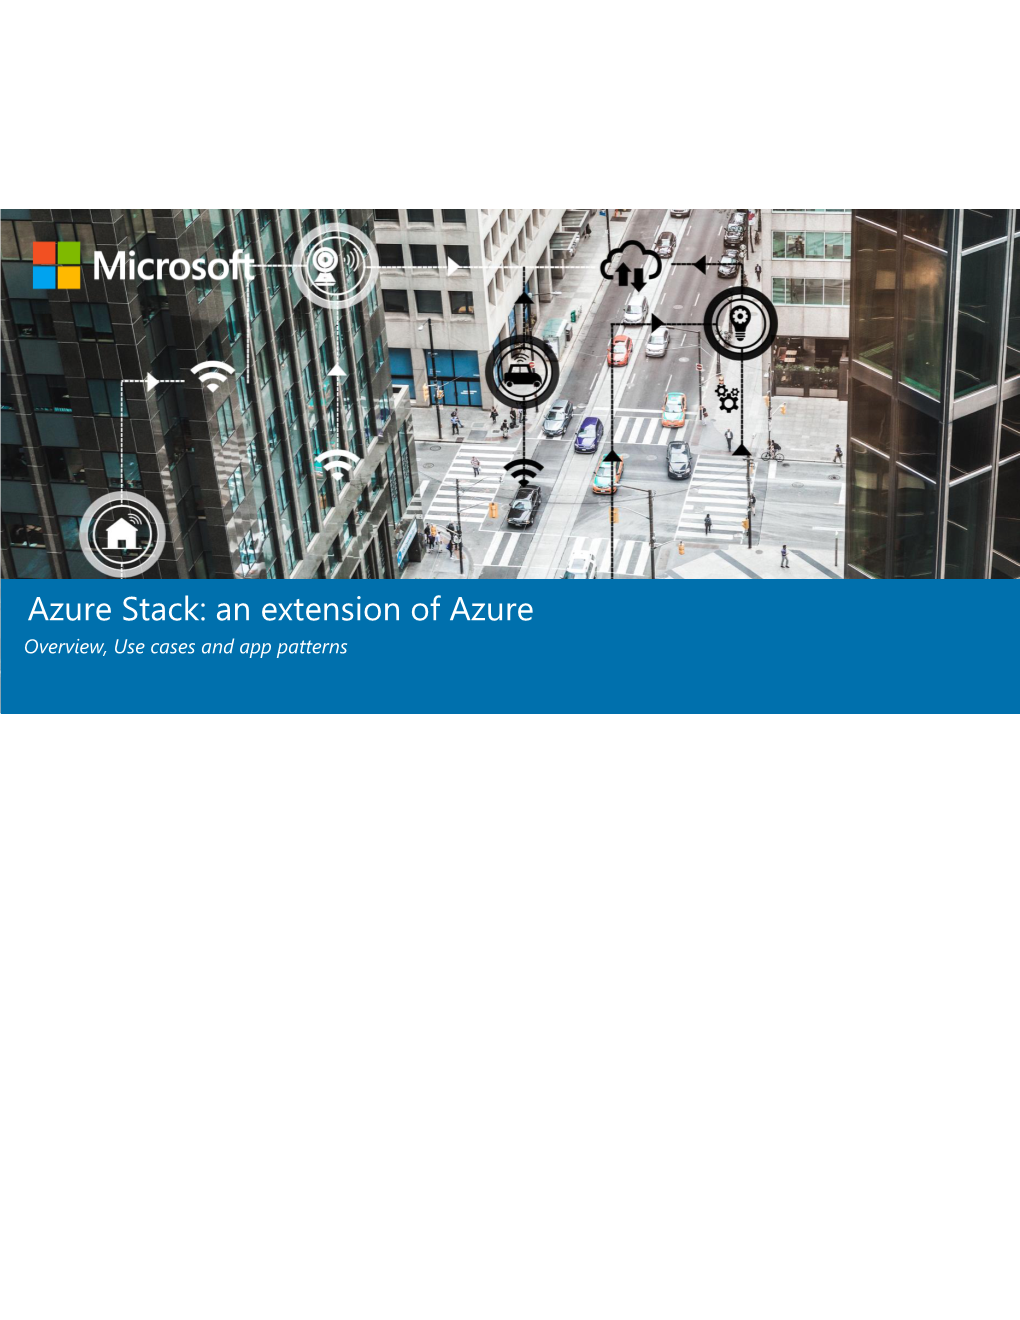 Azure Stack: an Extension of Azure